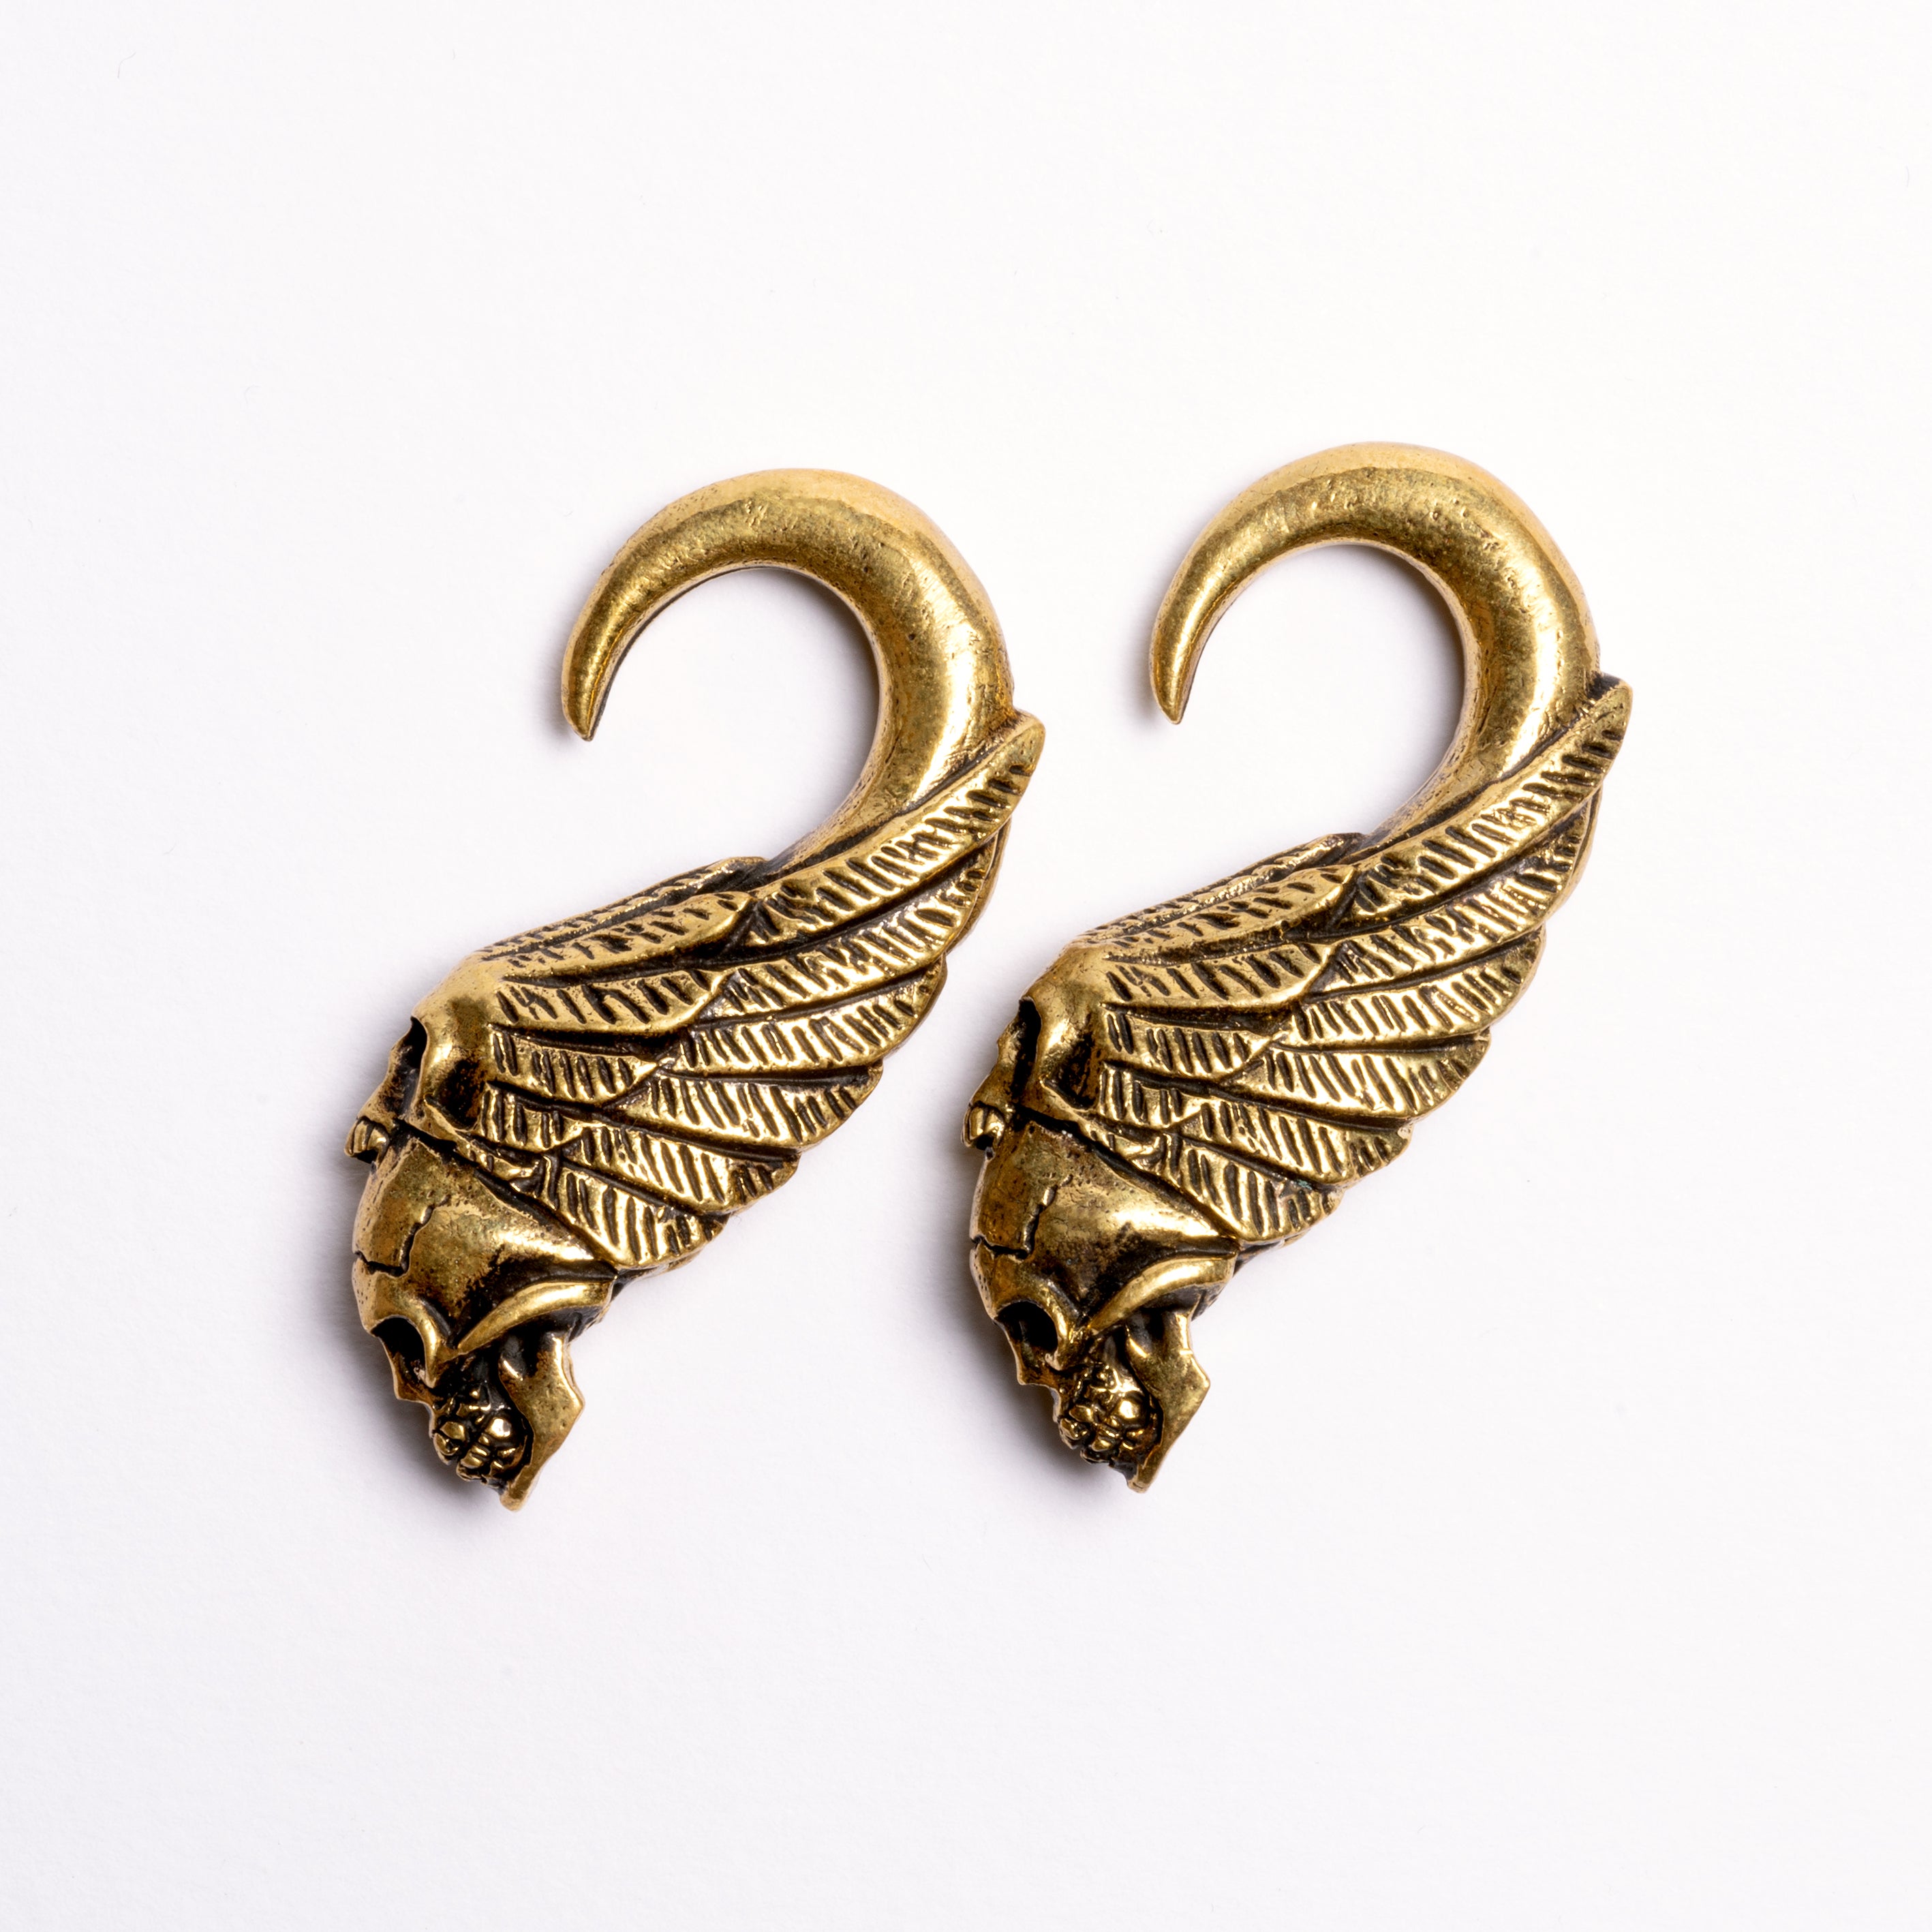 Brass Skull Ear Weights right side view